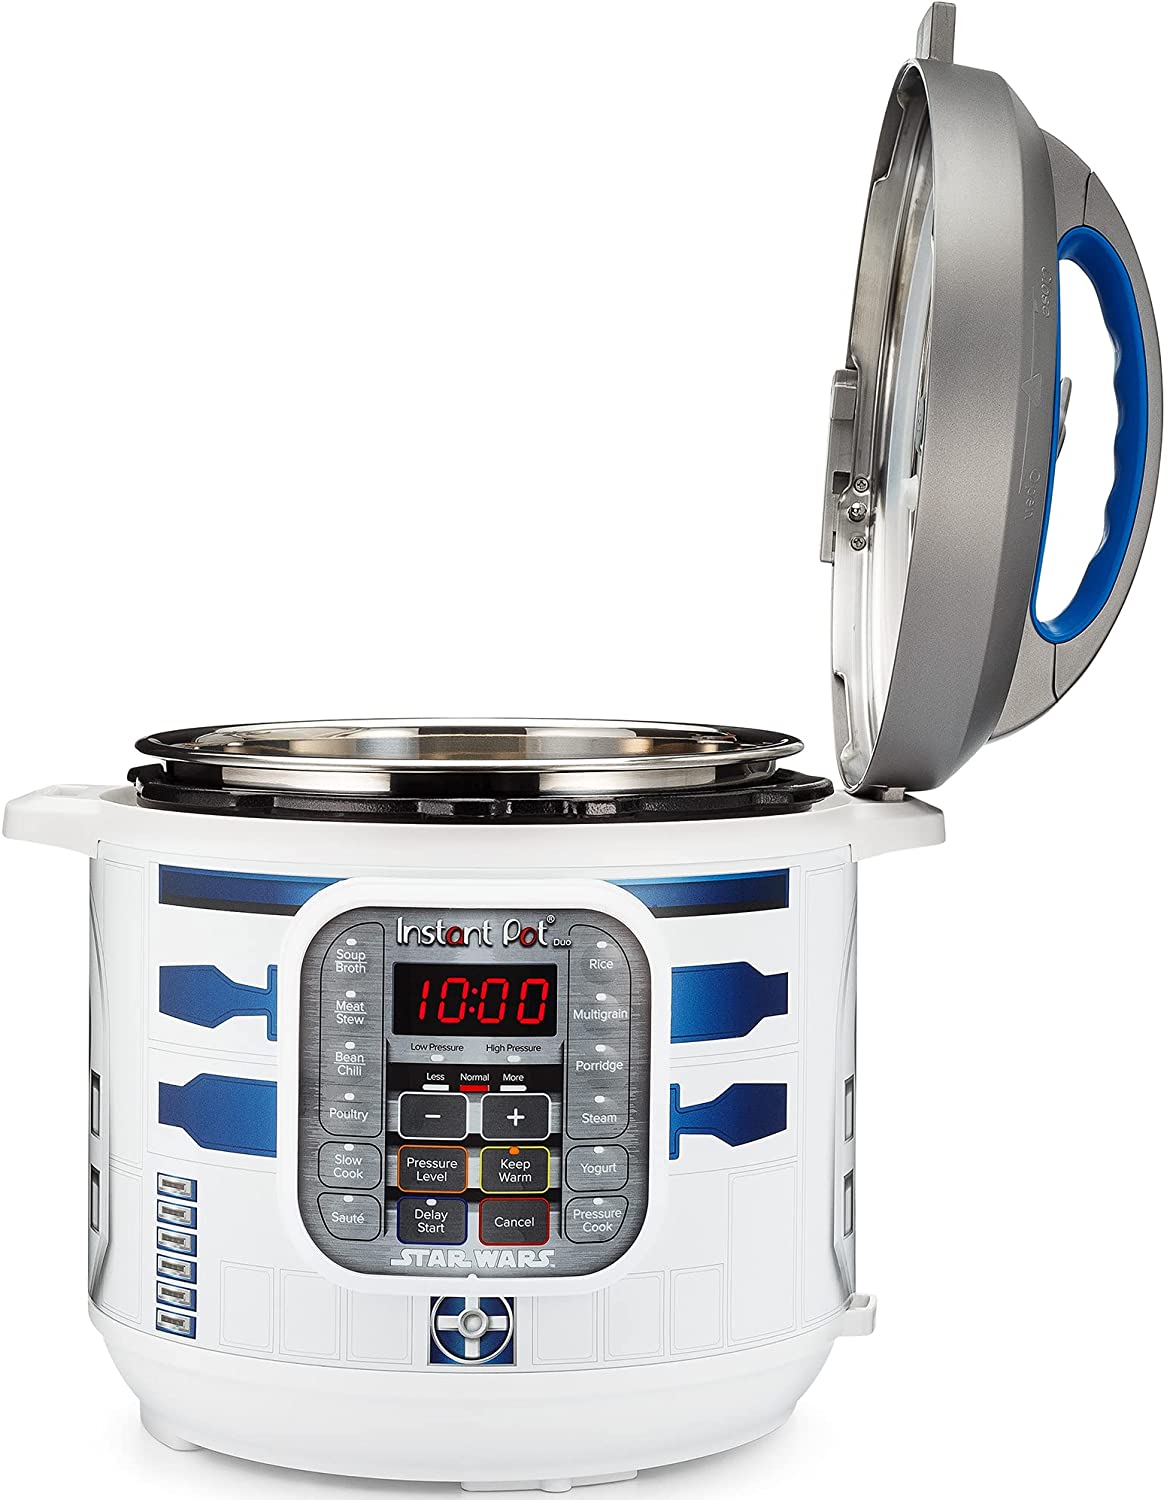 Star Wars Instant Pot Special Collection: Baby Yoda, R2D2